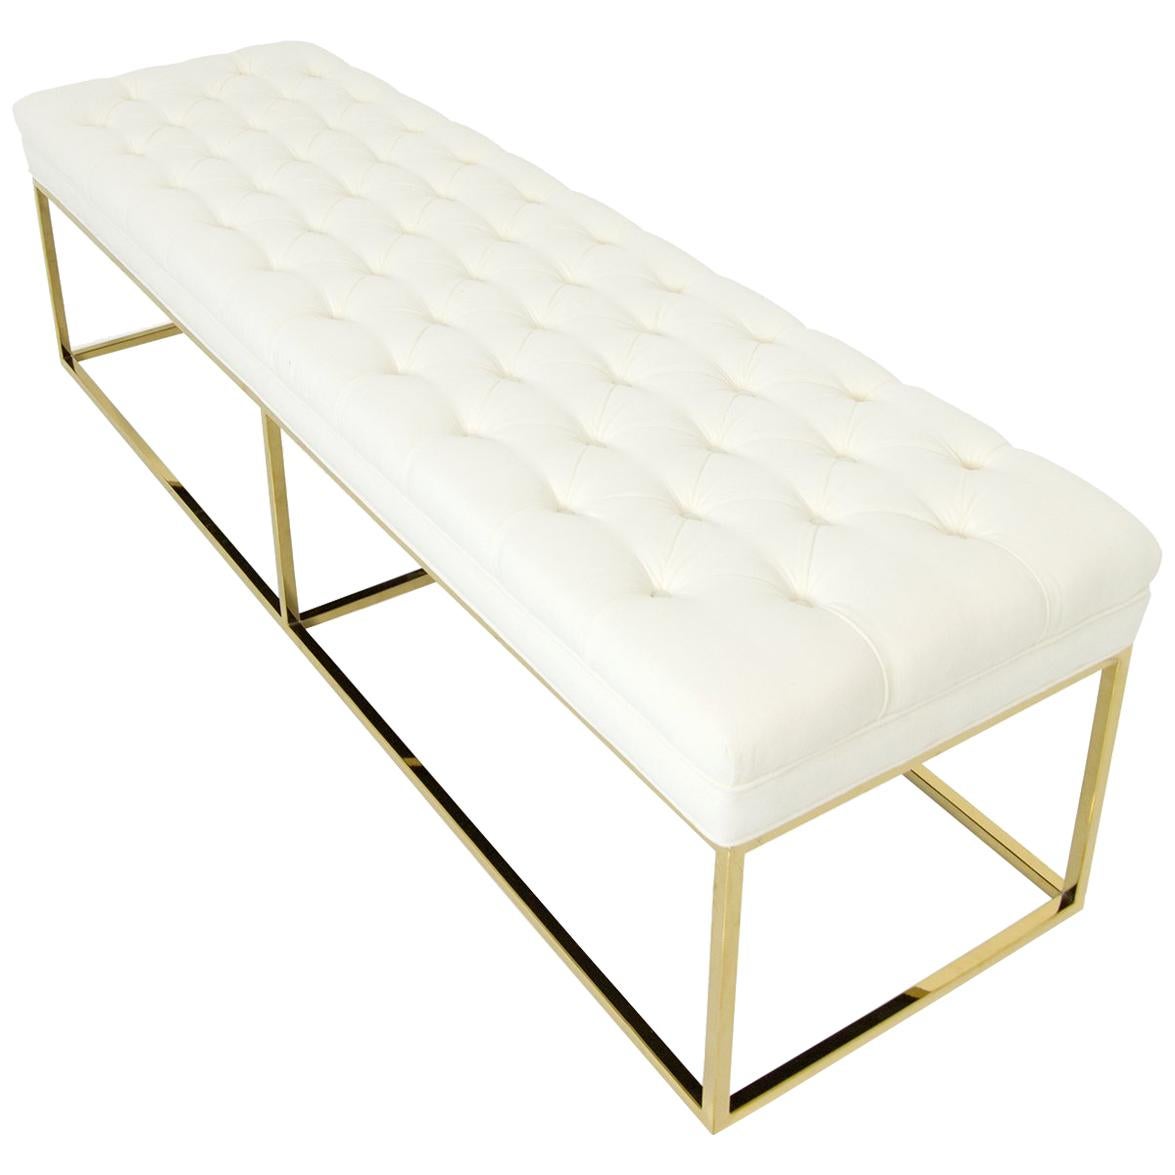 Modern Style Velvet Tufted Ottoman Bench with Polished Brass Geometric Frames For Sale